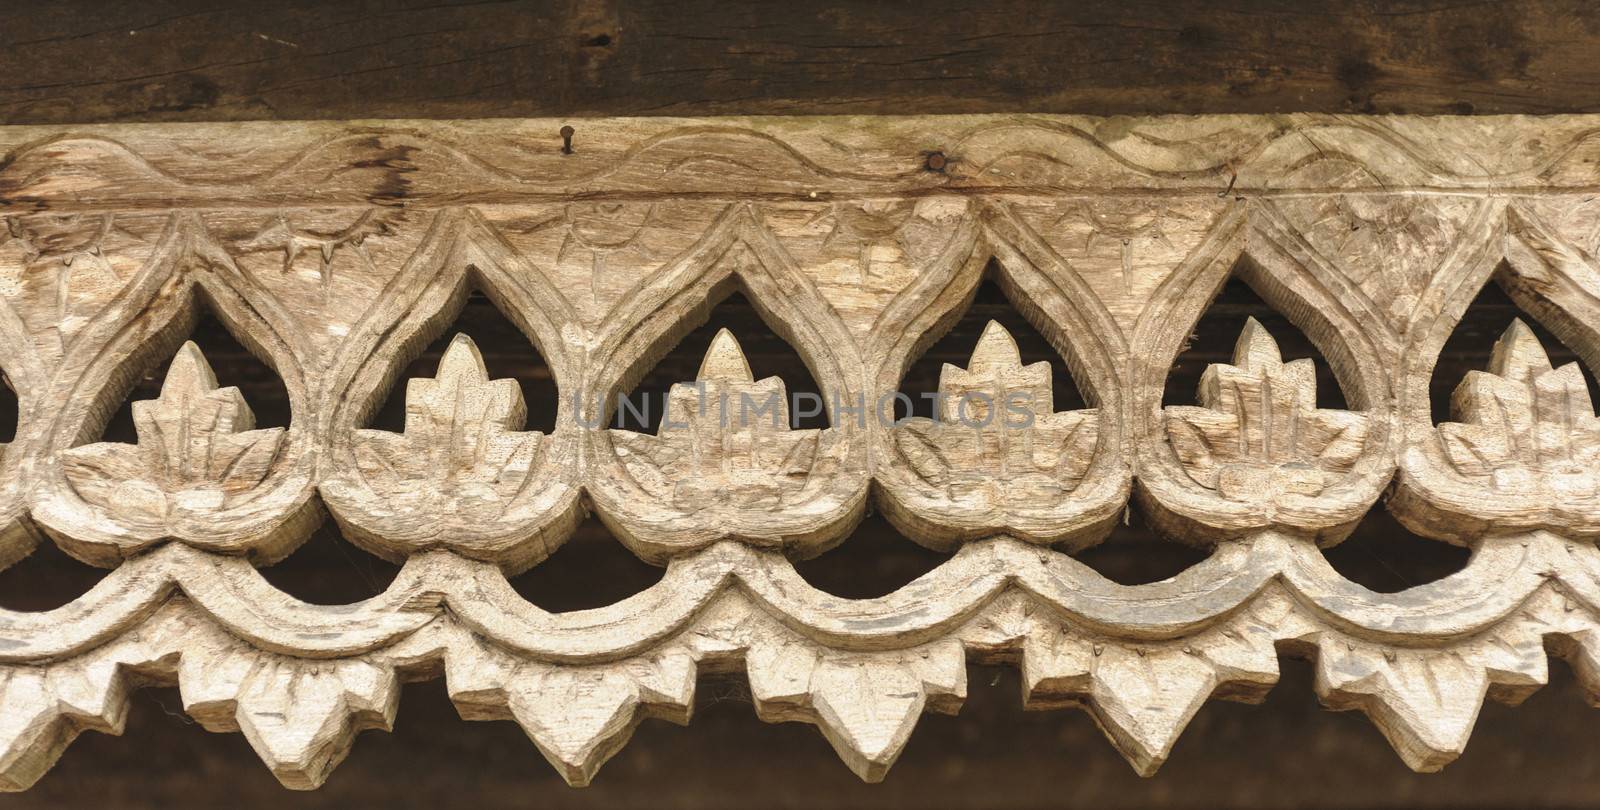 Carved wooden lattice work with Thai style pattern art in Thailand.